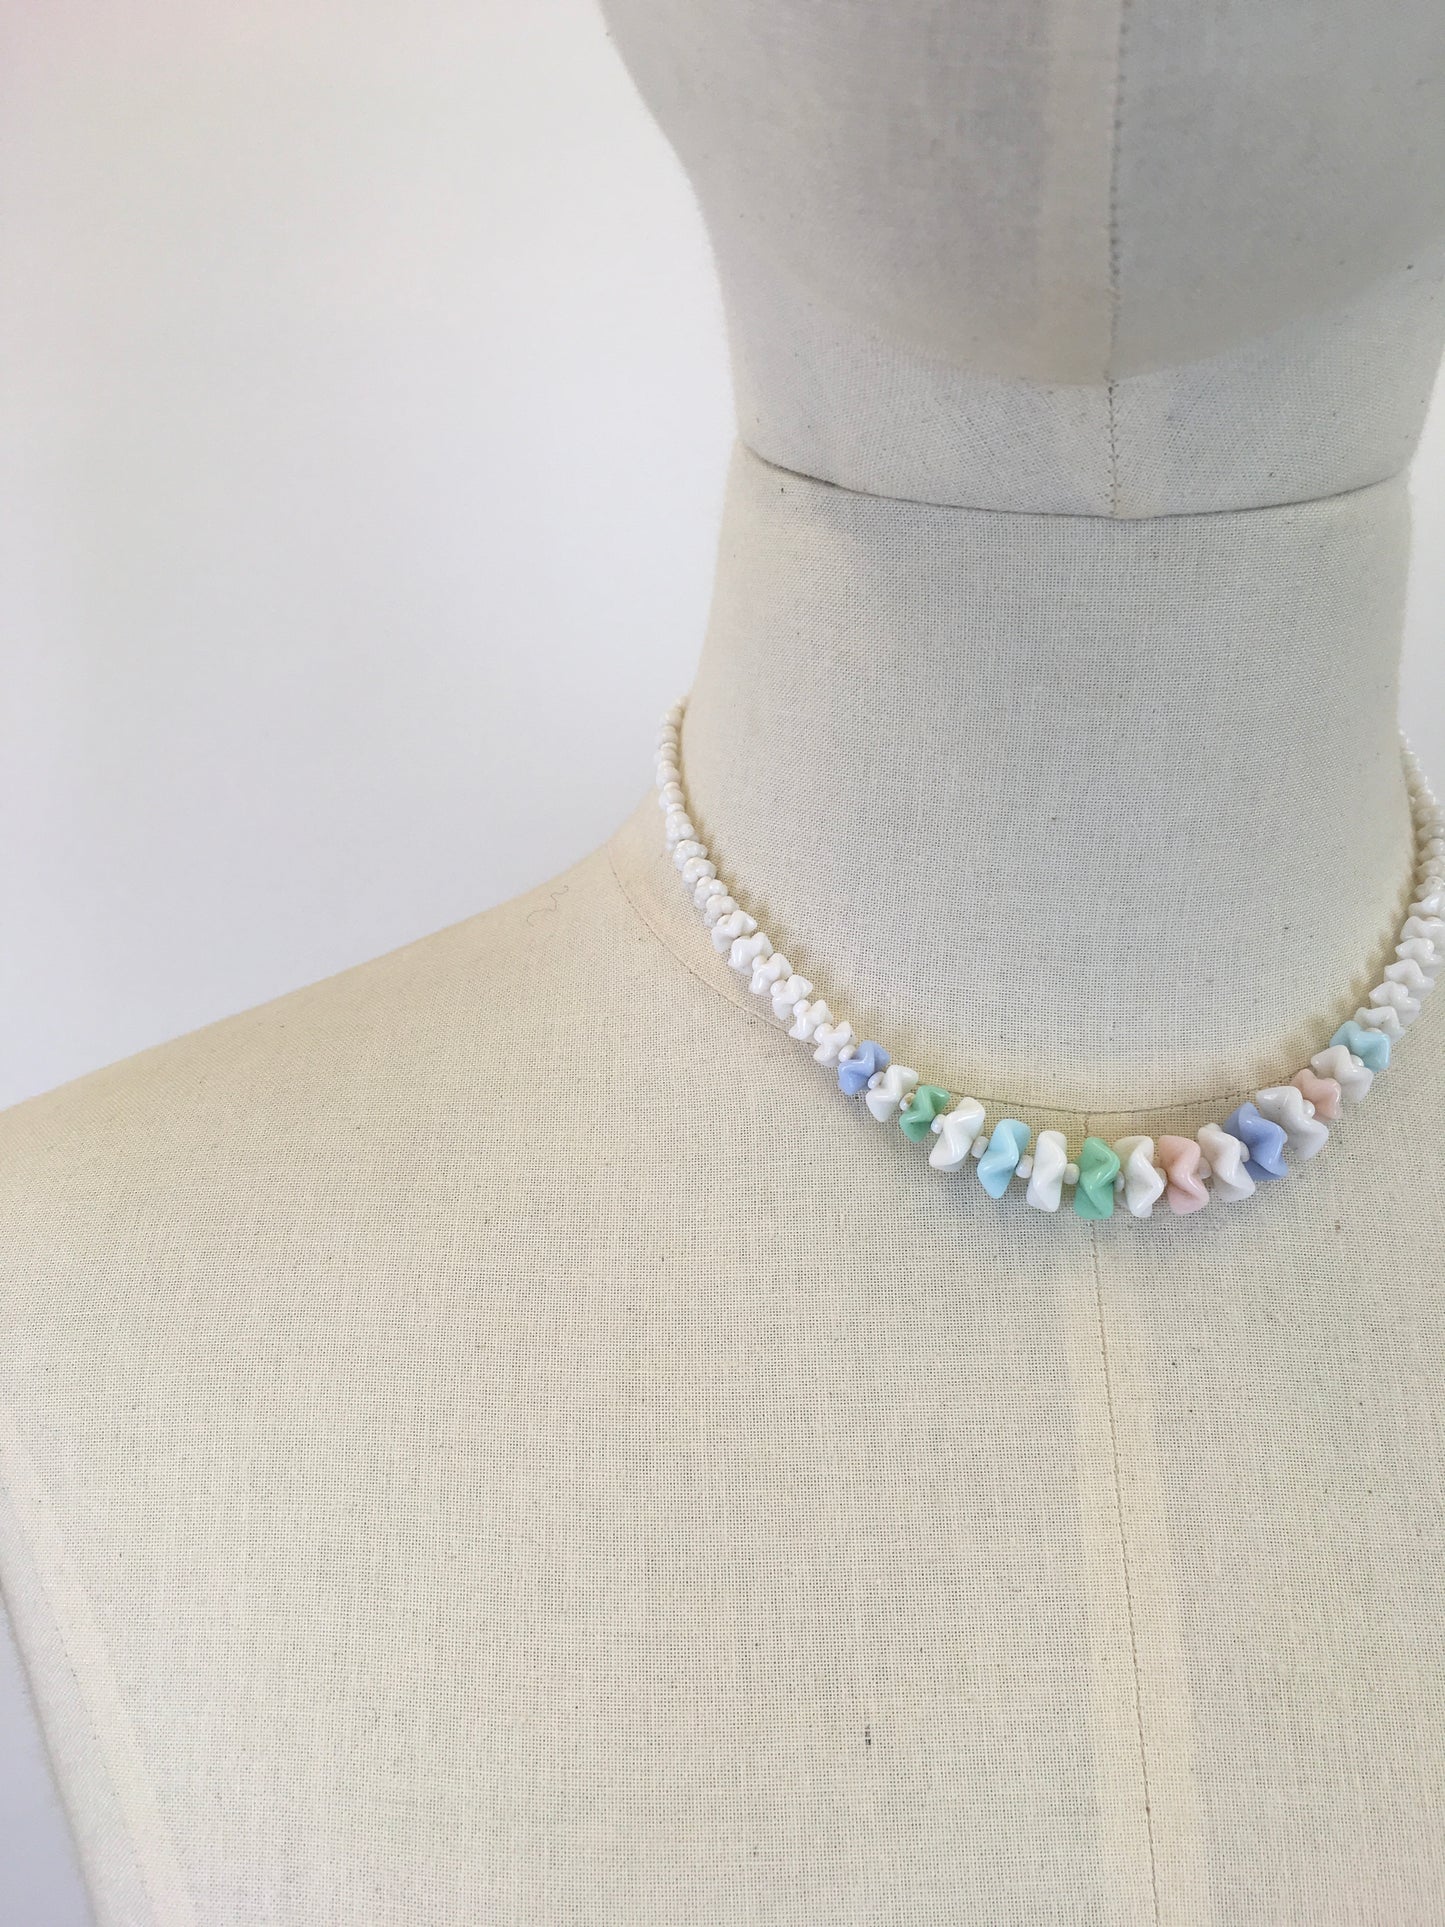 Original 1940’s Darling Glass Necklace with Graduated Beads - In Pastel Delights